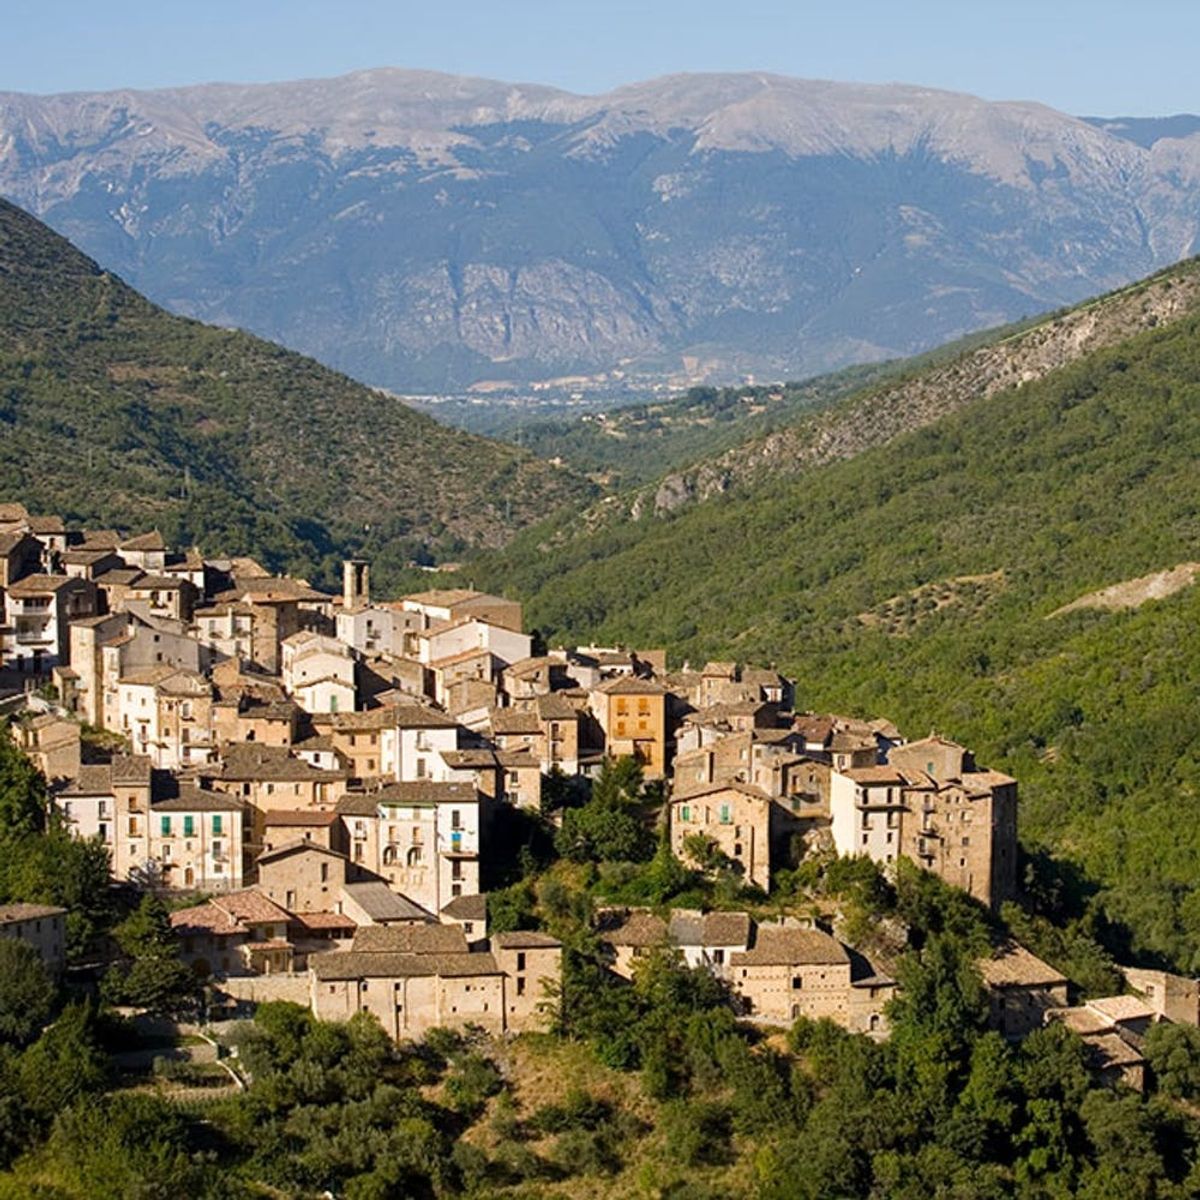 8 Hidden Gems of Italy You Need to Discover